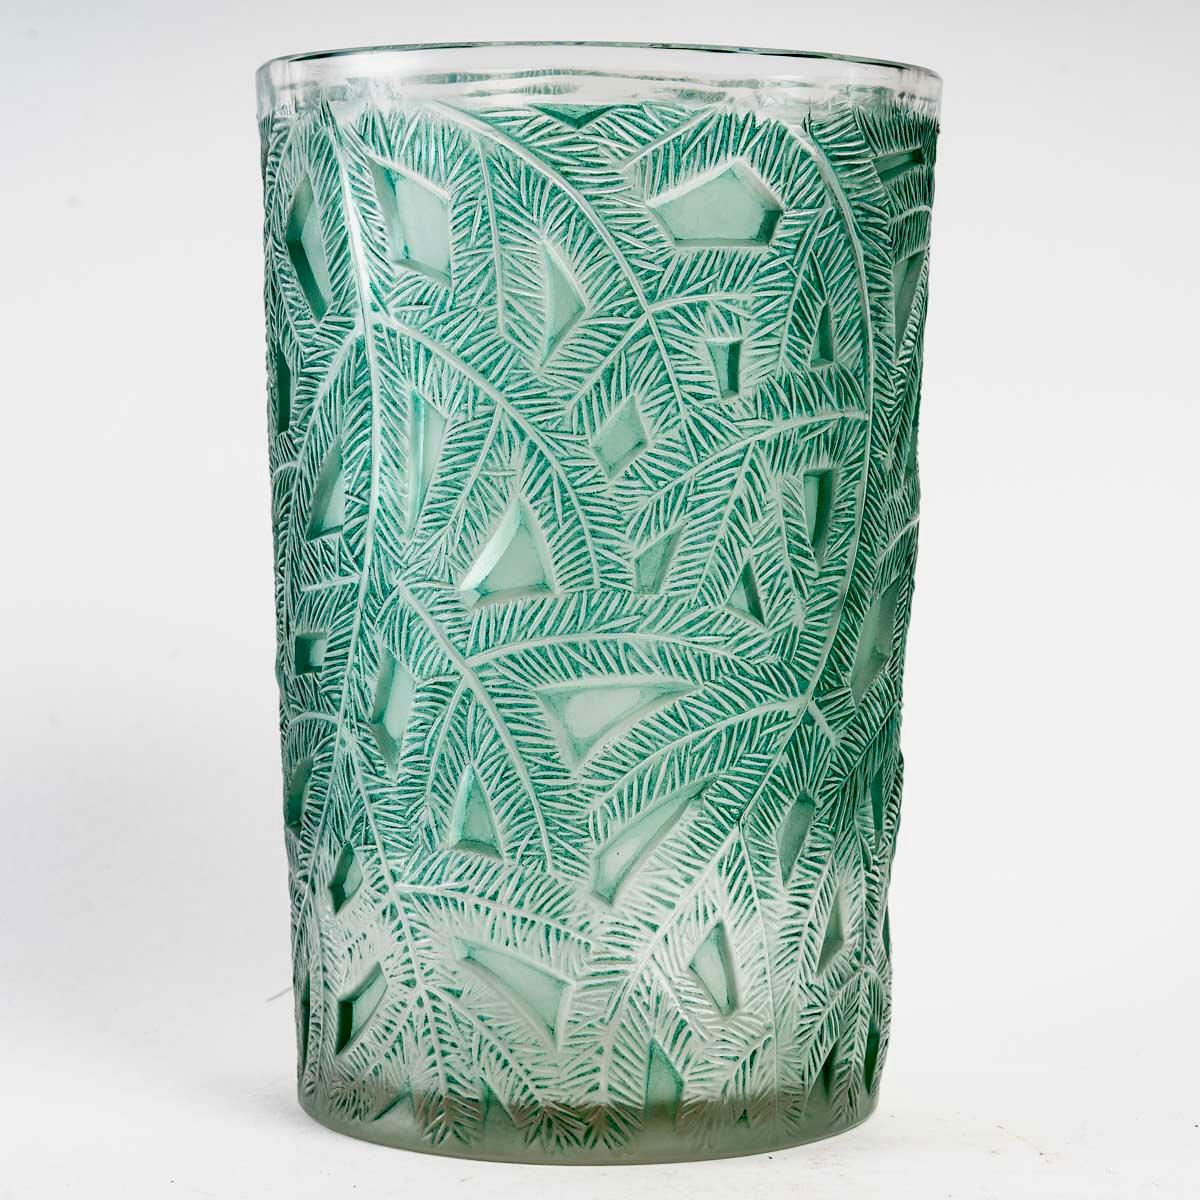 Art Deco 1923 René Lalique Epicea Vase in Frosted Glass with Green Patina, Spruce